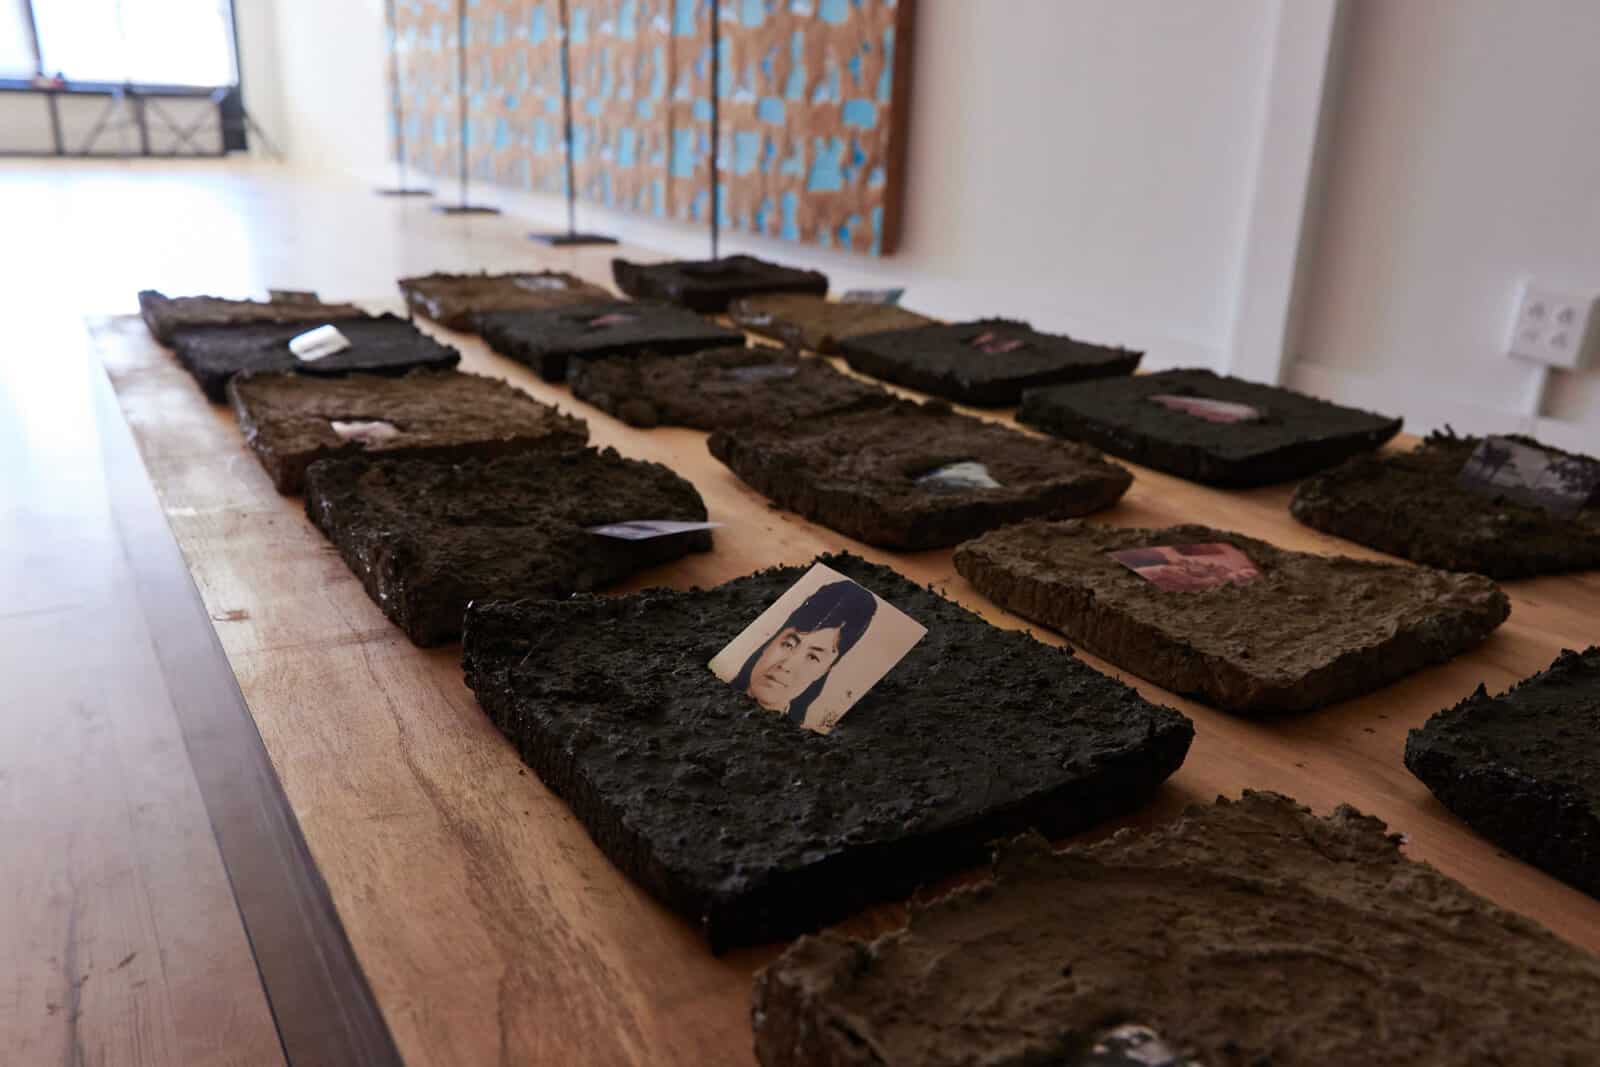 LaRissa Rogers sets family photographs into earth tiles in 'Unfortunately It Was Paradise' at MCLA in North Adams.